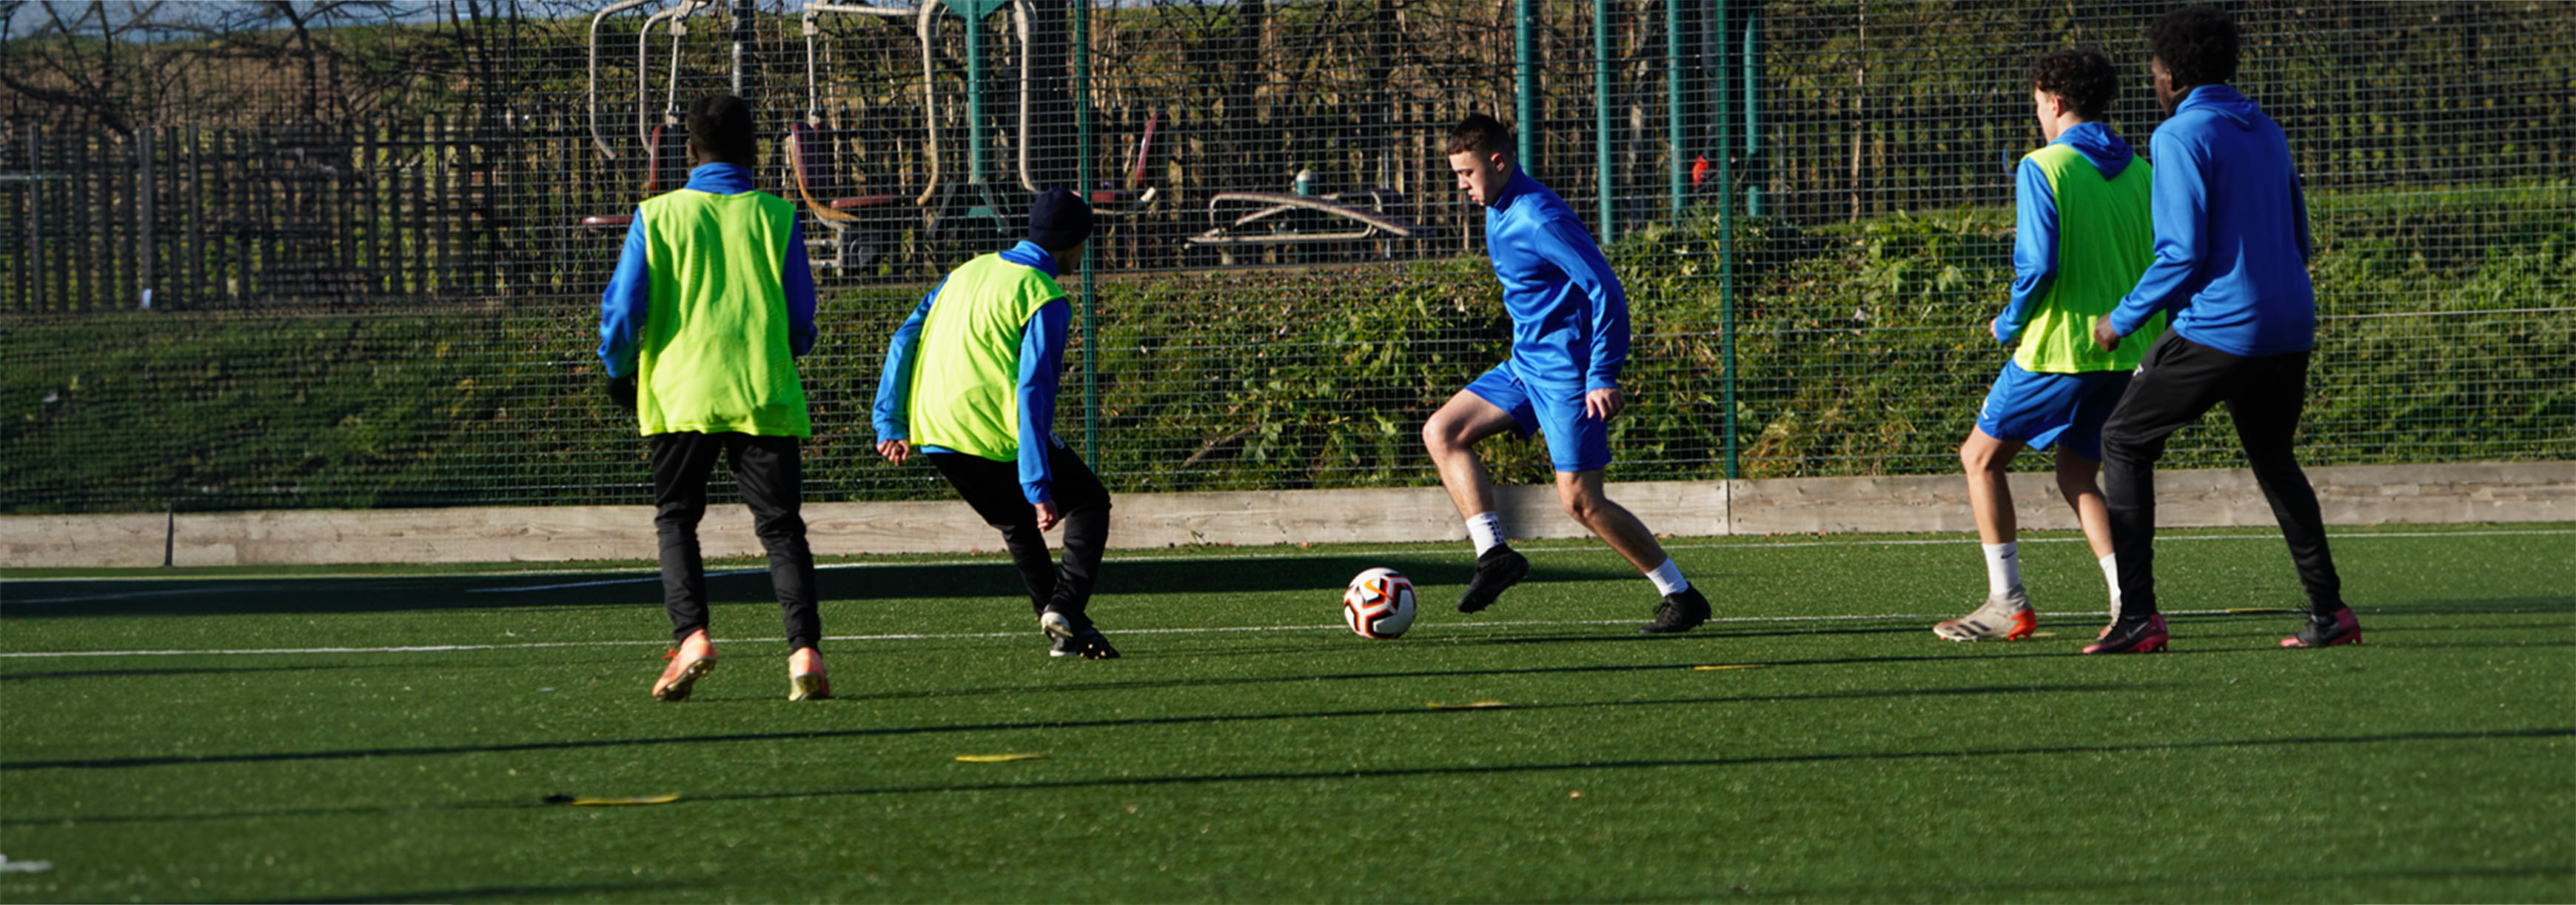 During a small-sided game in training, a player prepares to make a front foot pass as an opponent goes to close him down.